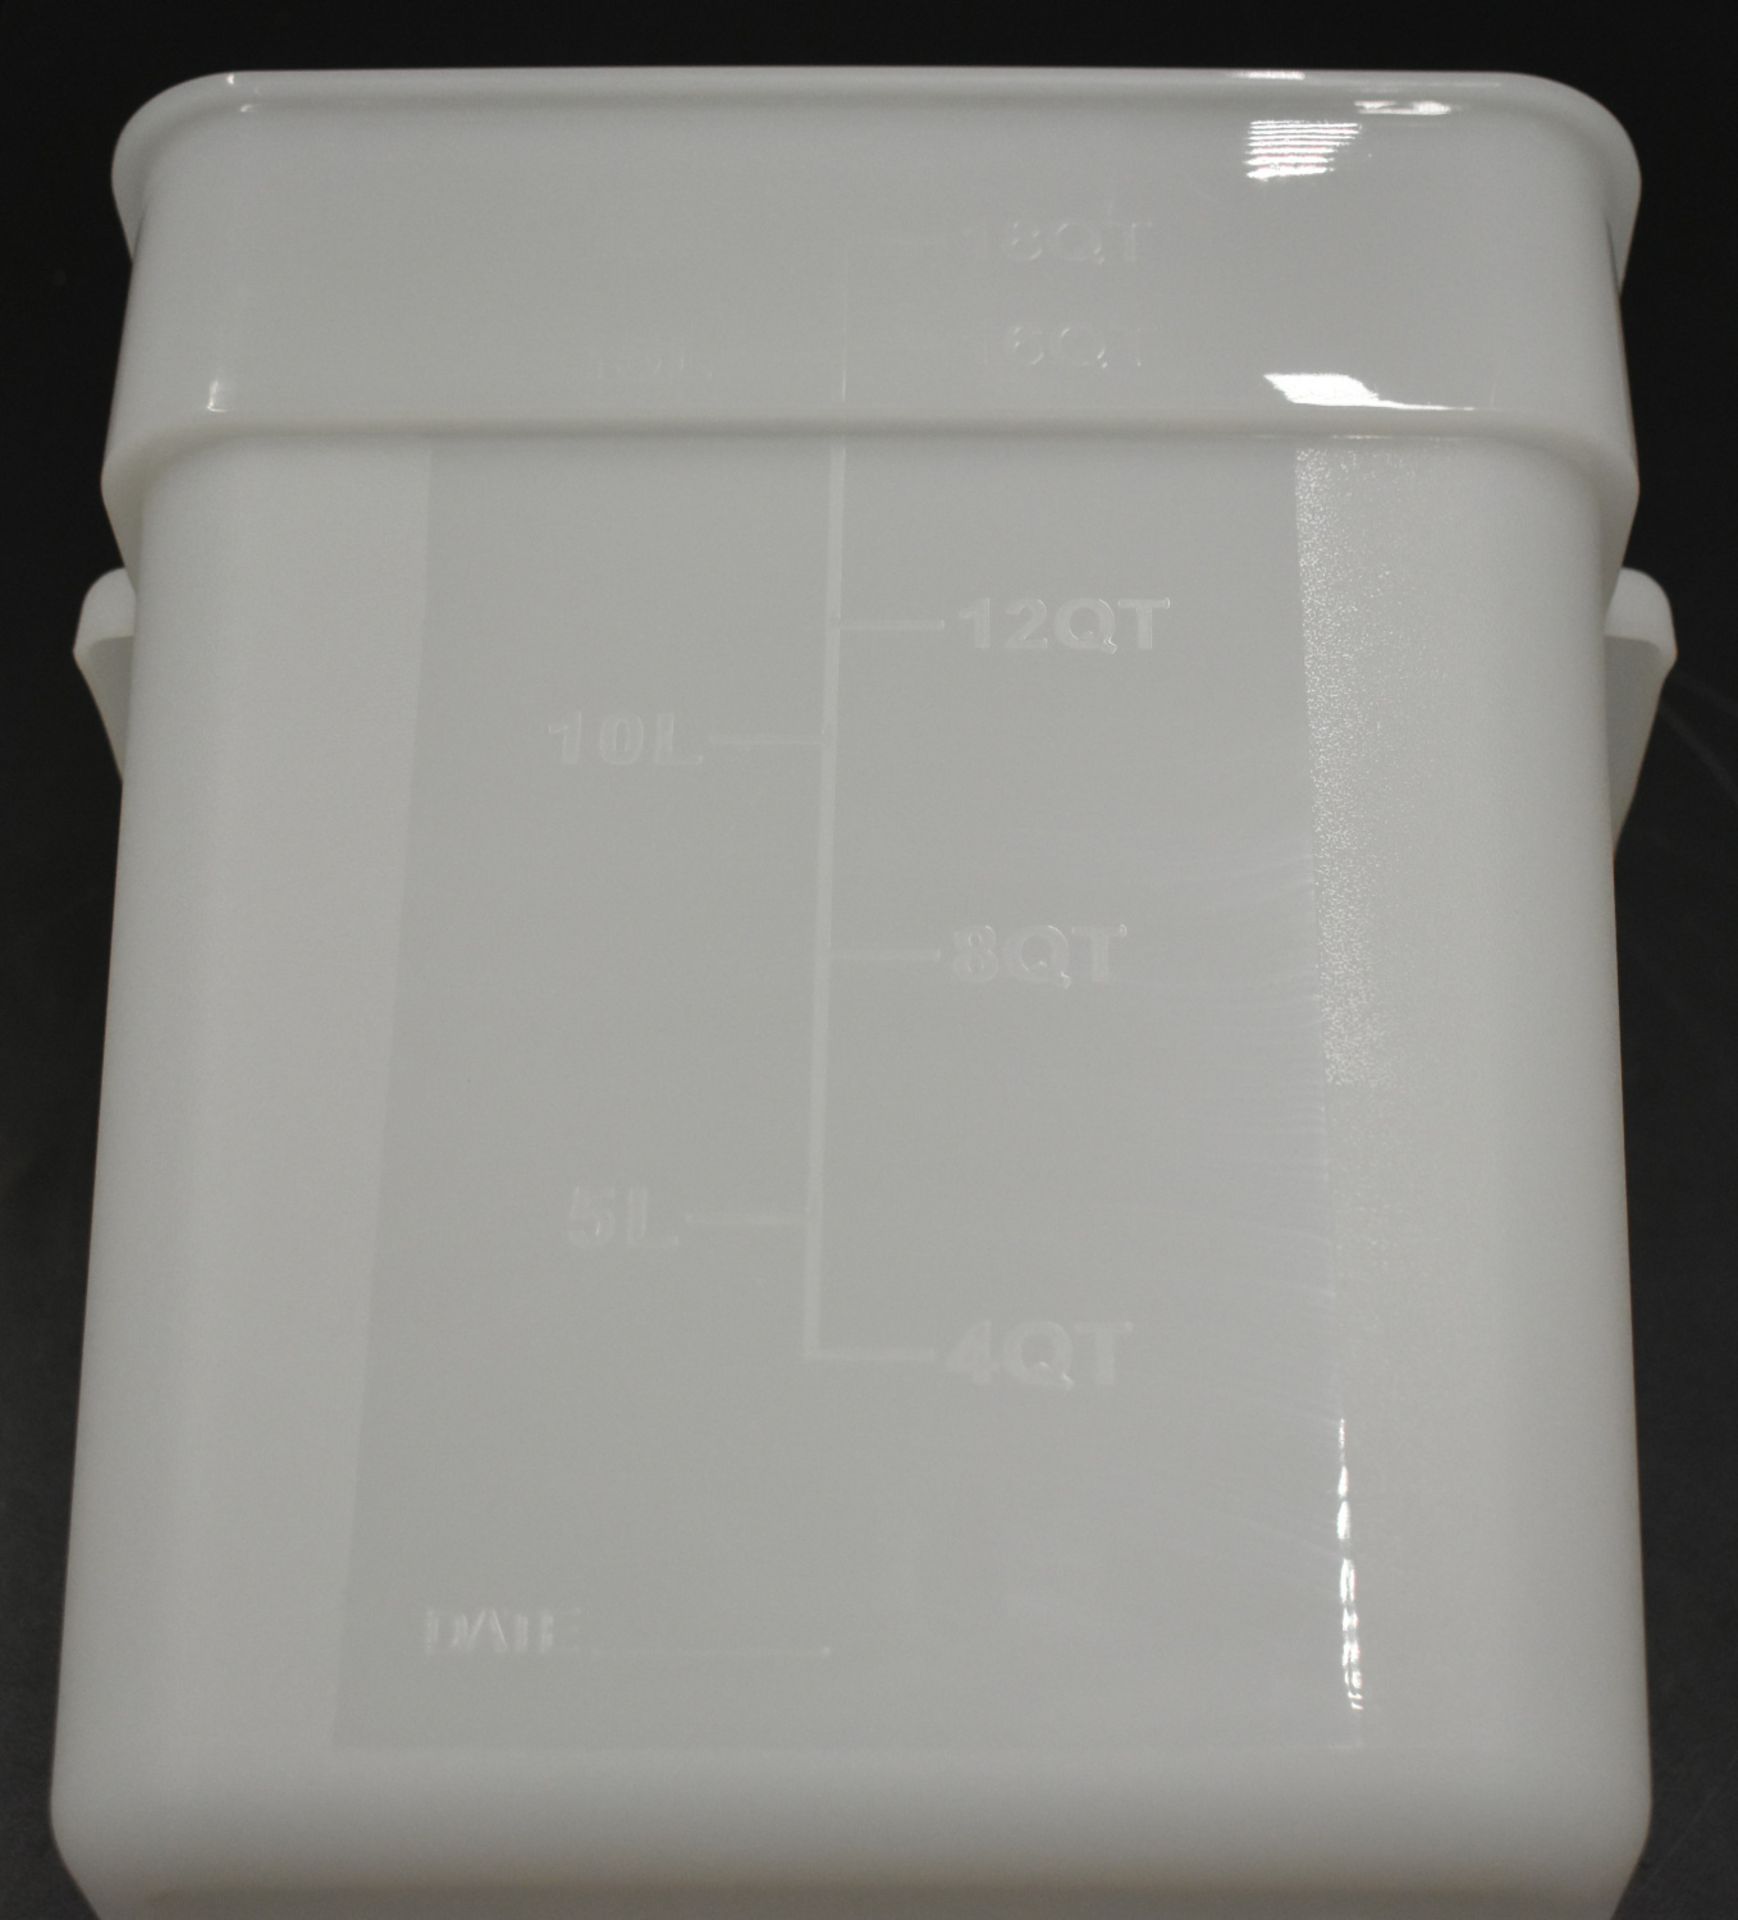 60x 18L food storage containers - white - 12 per box - Image 3 of 3